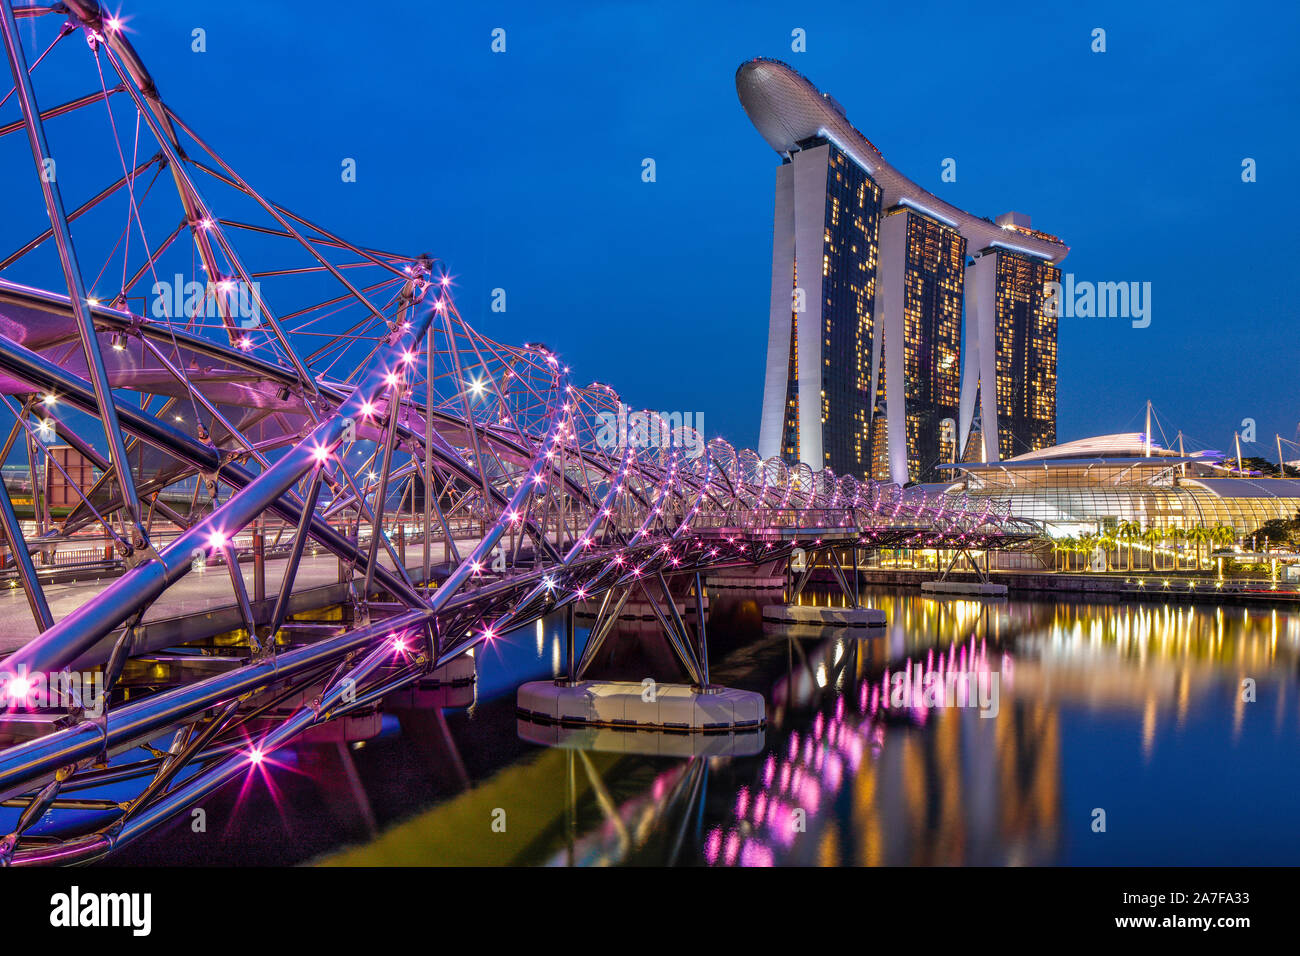 The Helix Bridge with the Marina Bay Sands in the background, Marina Bay, Singapore. Stock Photo